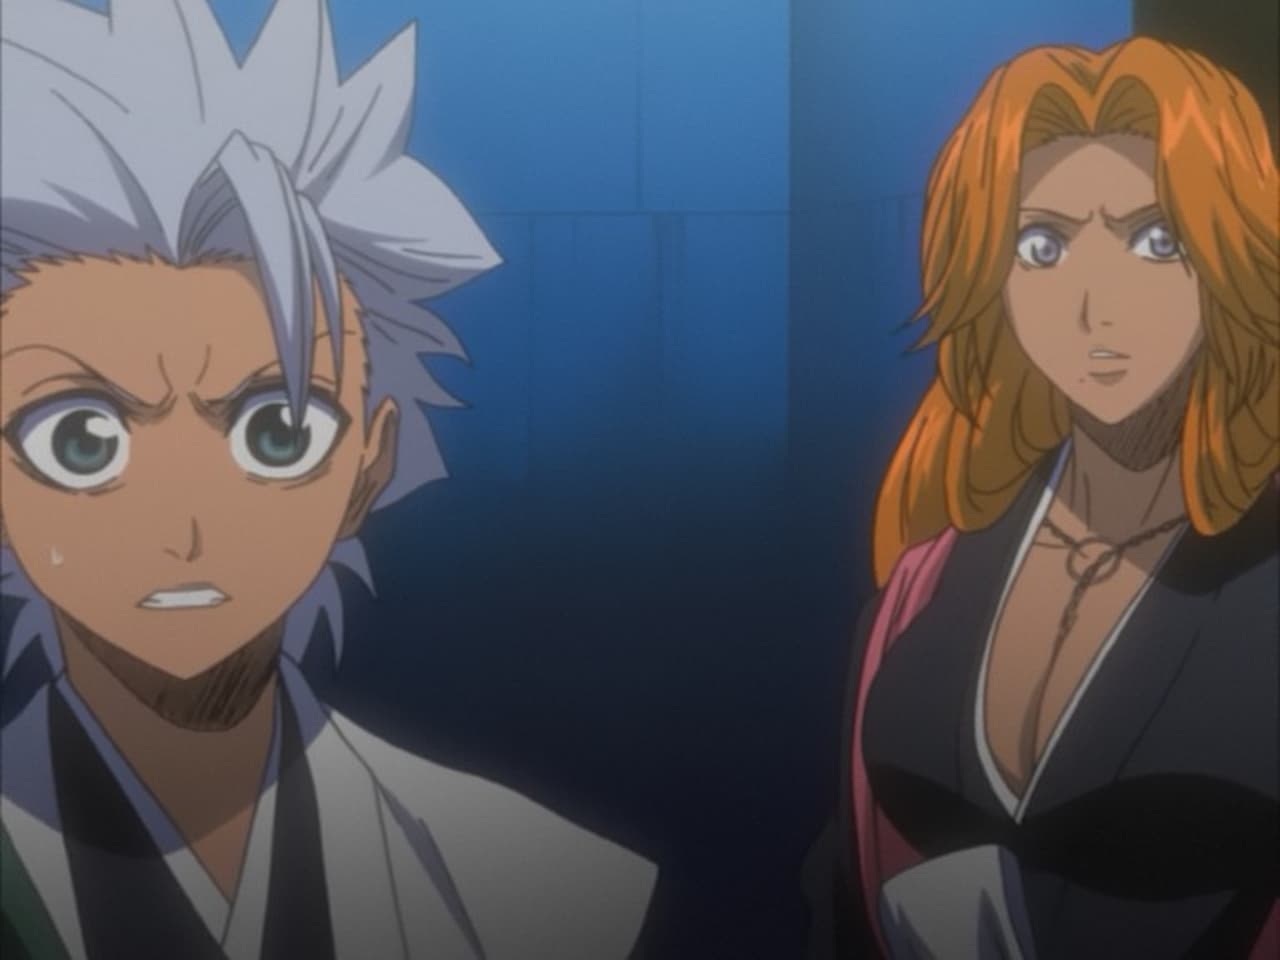 Bleach - Season 1 Episode 60 : Reality of the Despair, the Assassin's Dagger is Swung